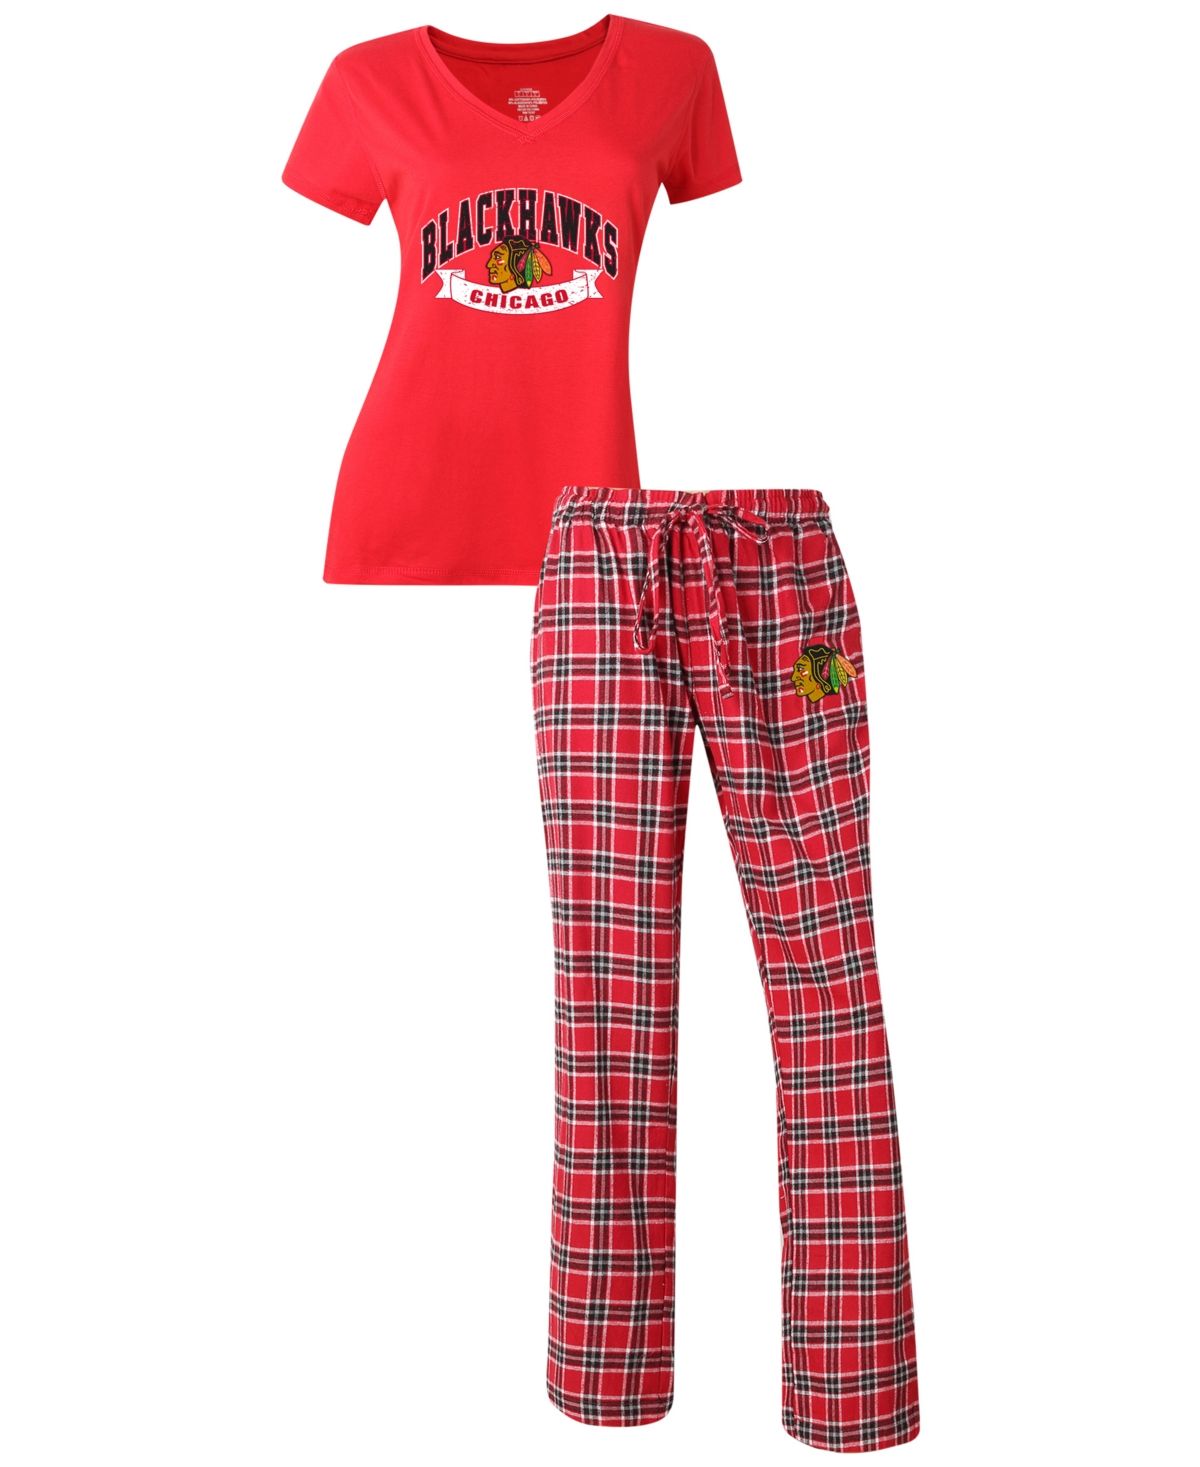 Women's Chicago Blackhawks Concepts Sport Red Medalist Flannel Pajama Pant and T-Shirt Set